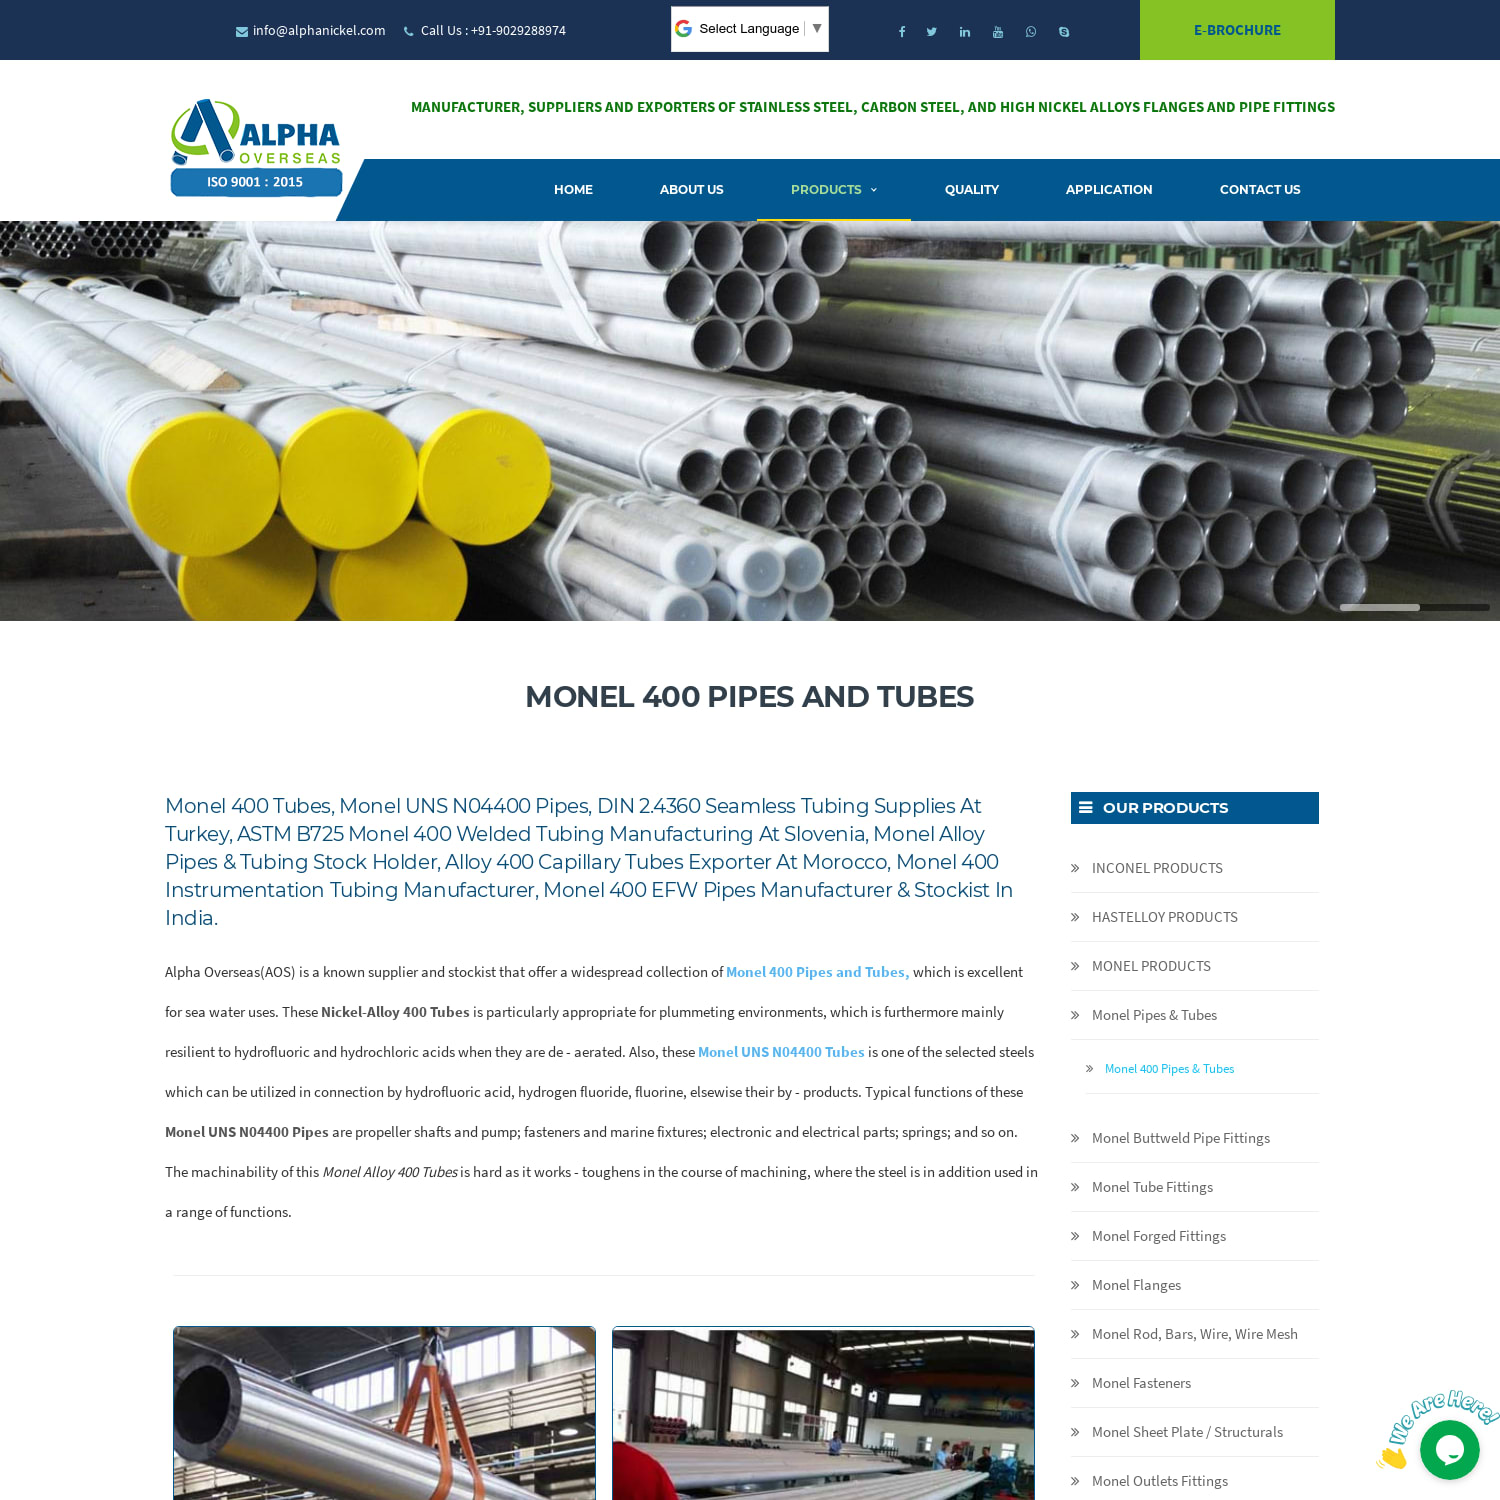 Monel 400 Pipes, Monel 400 Seamless Pipes, 400 Alloy Welded Tubes, Monel UNS N04400 Pipes Manufacturers & Suppliers